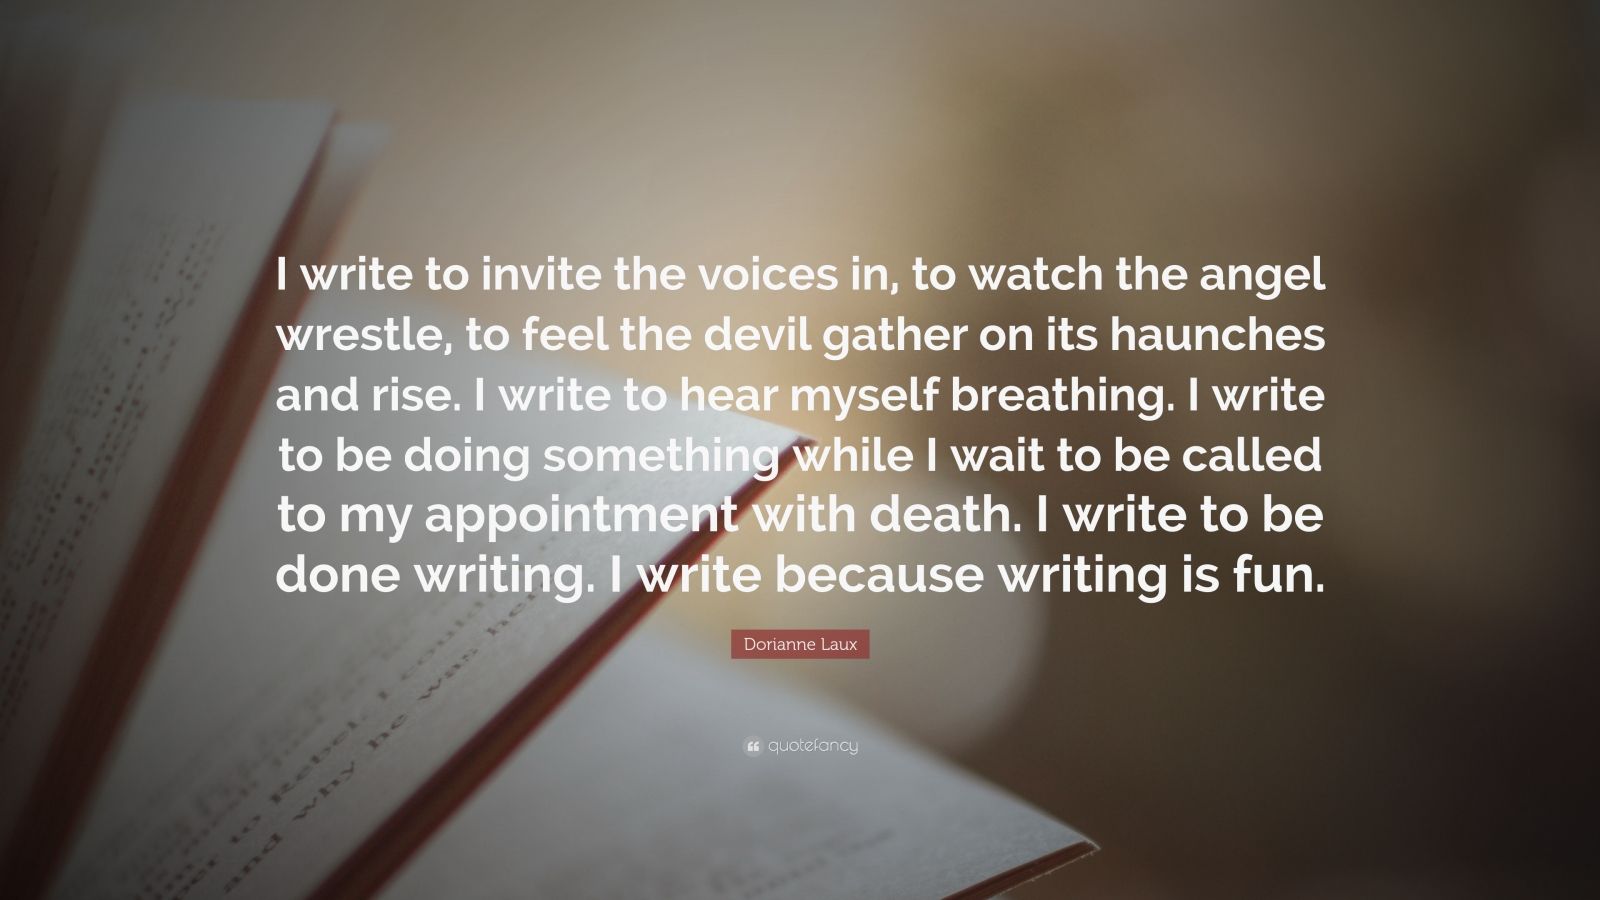 Dorianne Laux Quote: "I write to invite the voices in, to watch the angel wrestle, to feel the ...